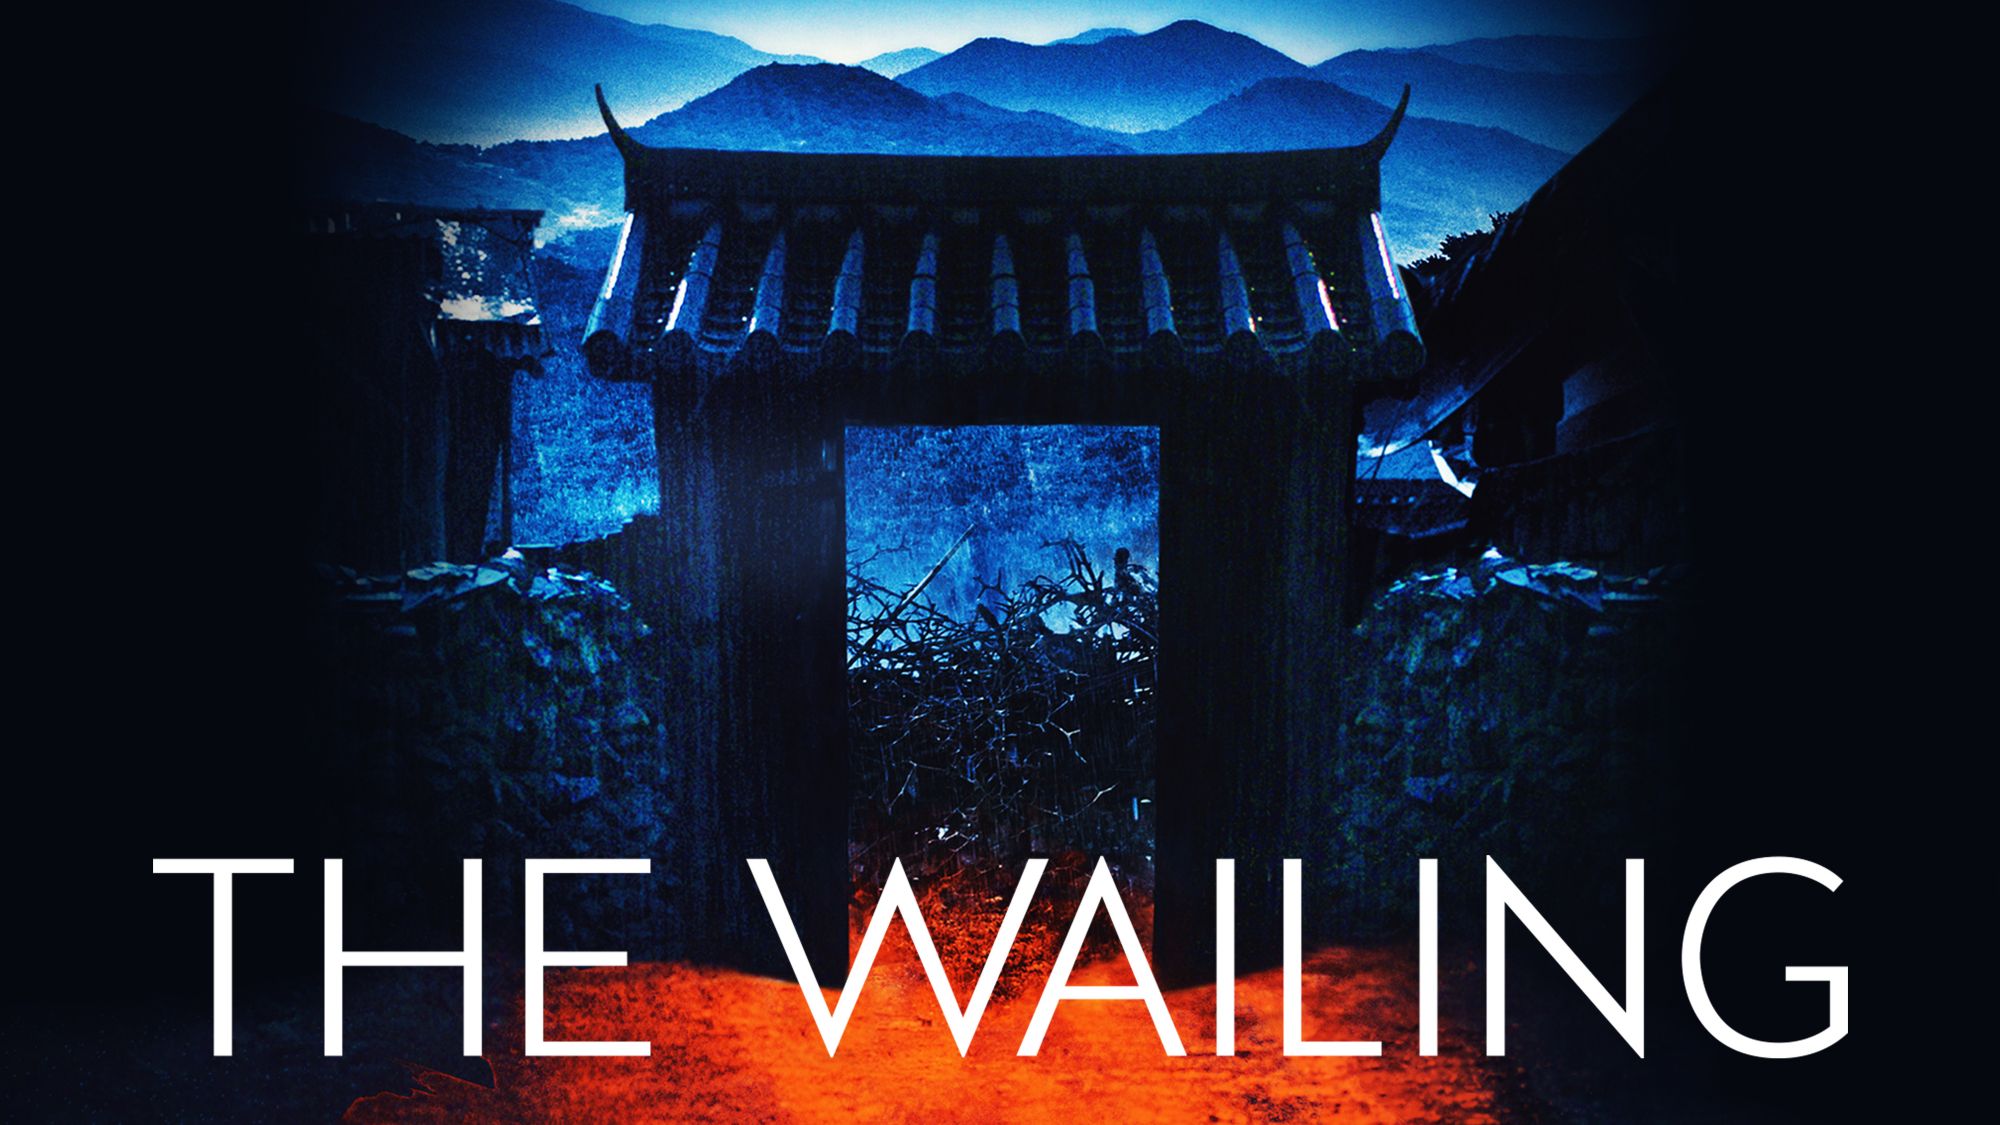 44-facts-about-the-movie-the-wailing